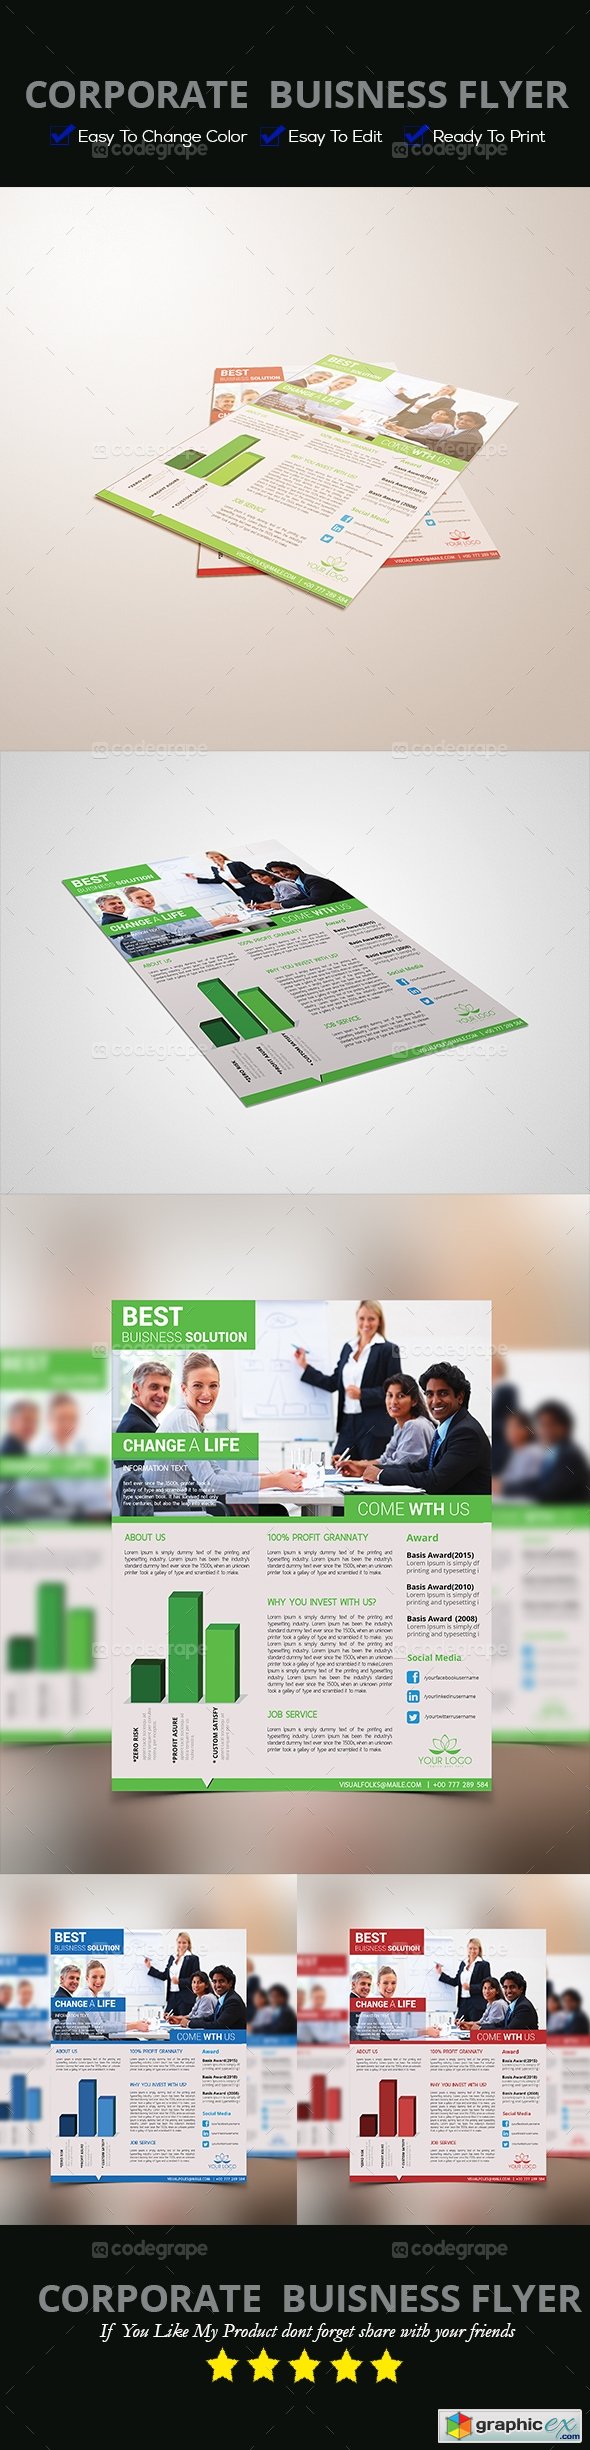 Corporate Business Flyer 5403